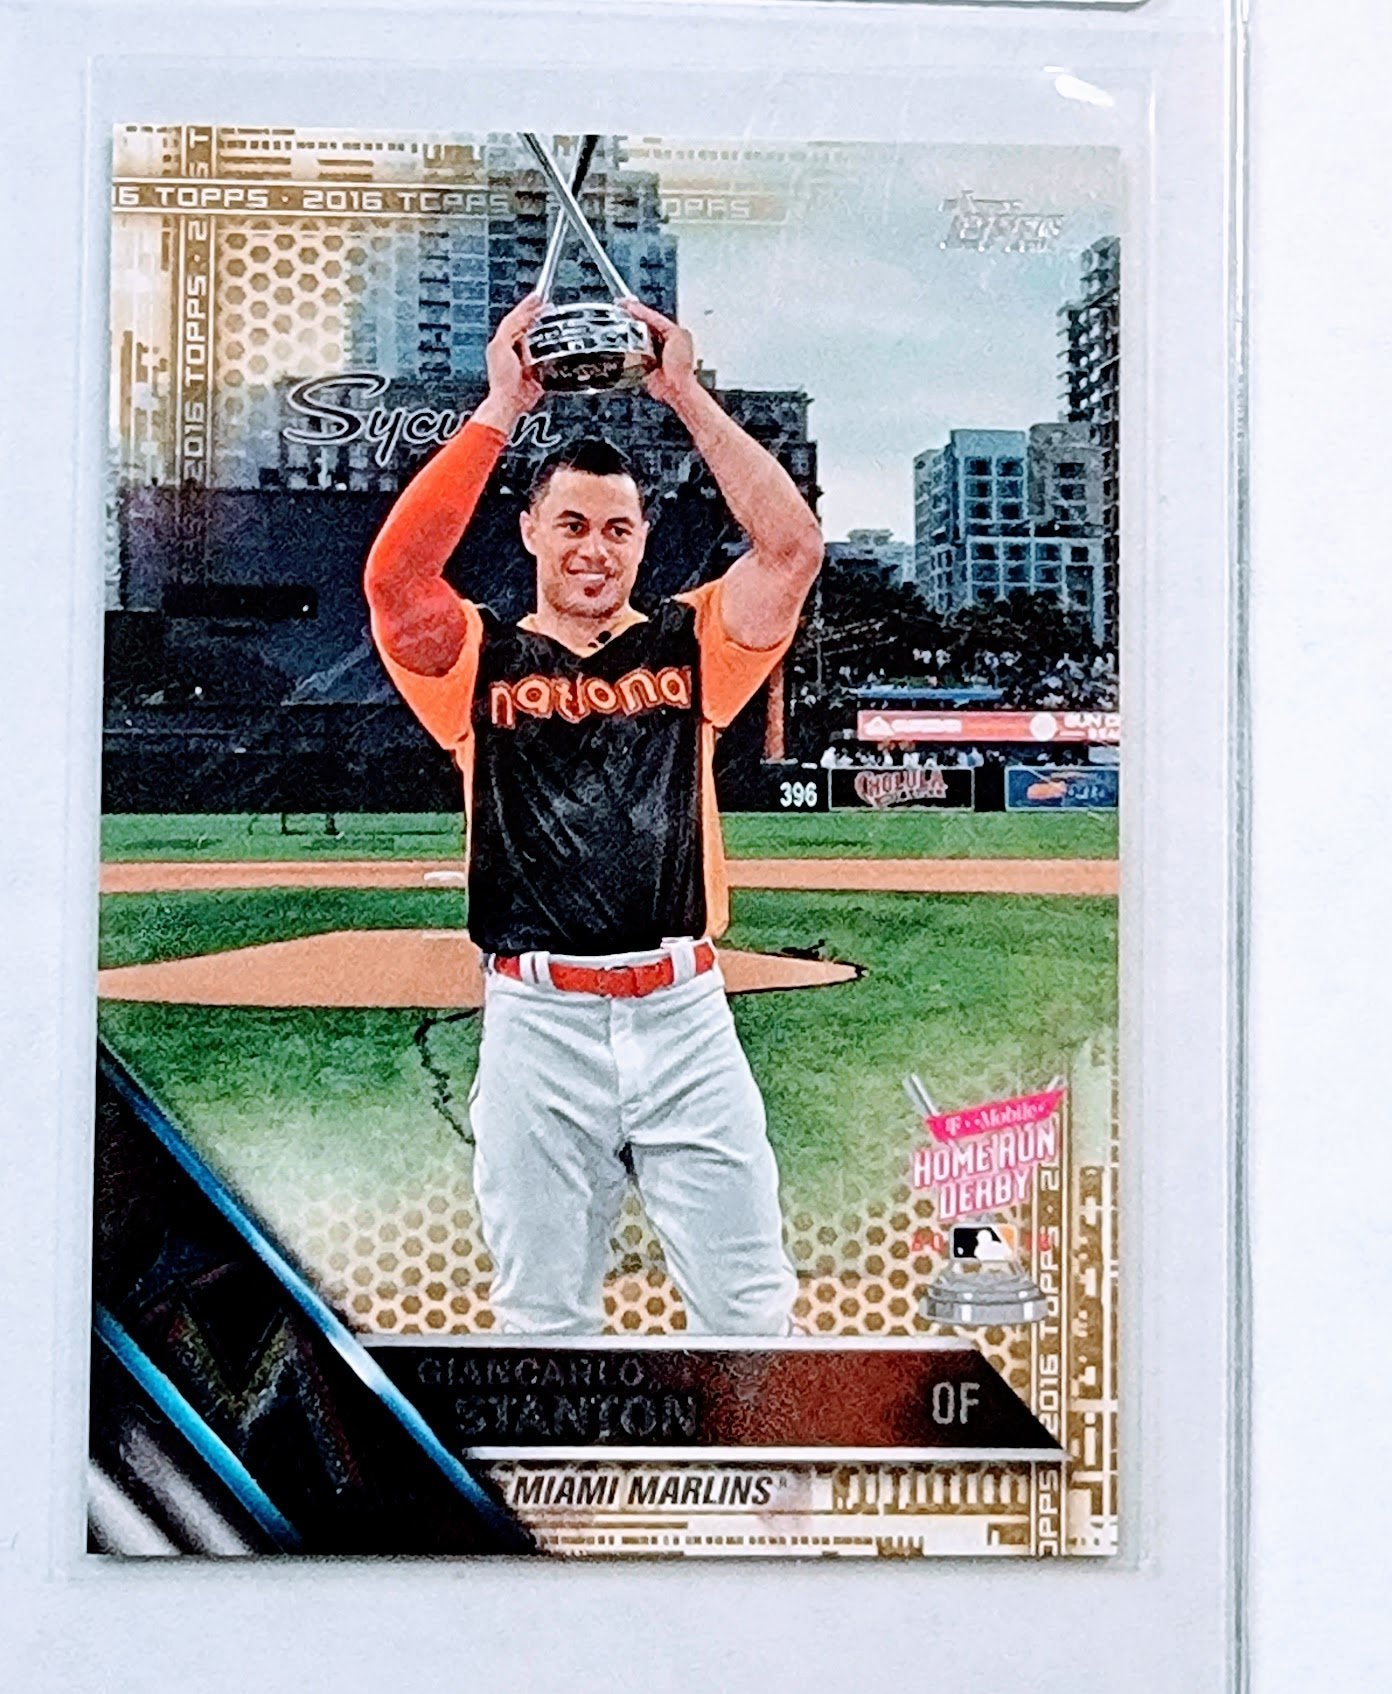 2016 Topps Update Gold Giancarlo Stanton Homerun Derby #'d 2016 Gold Baseball Card AVM1 simple Xclusive Collectibles   